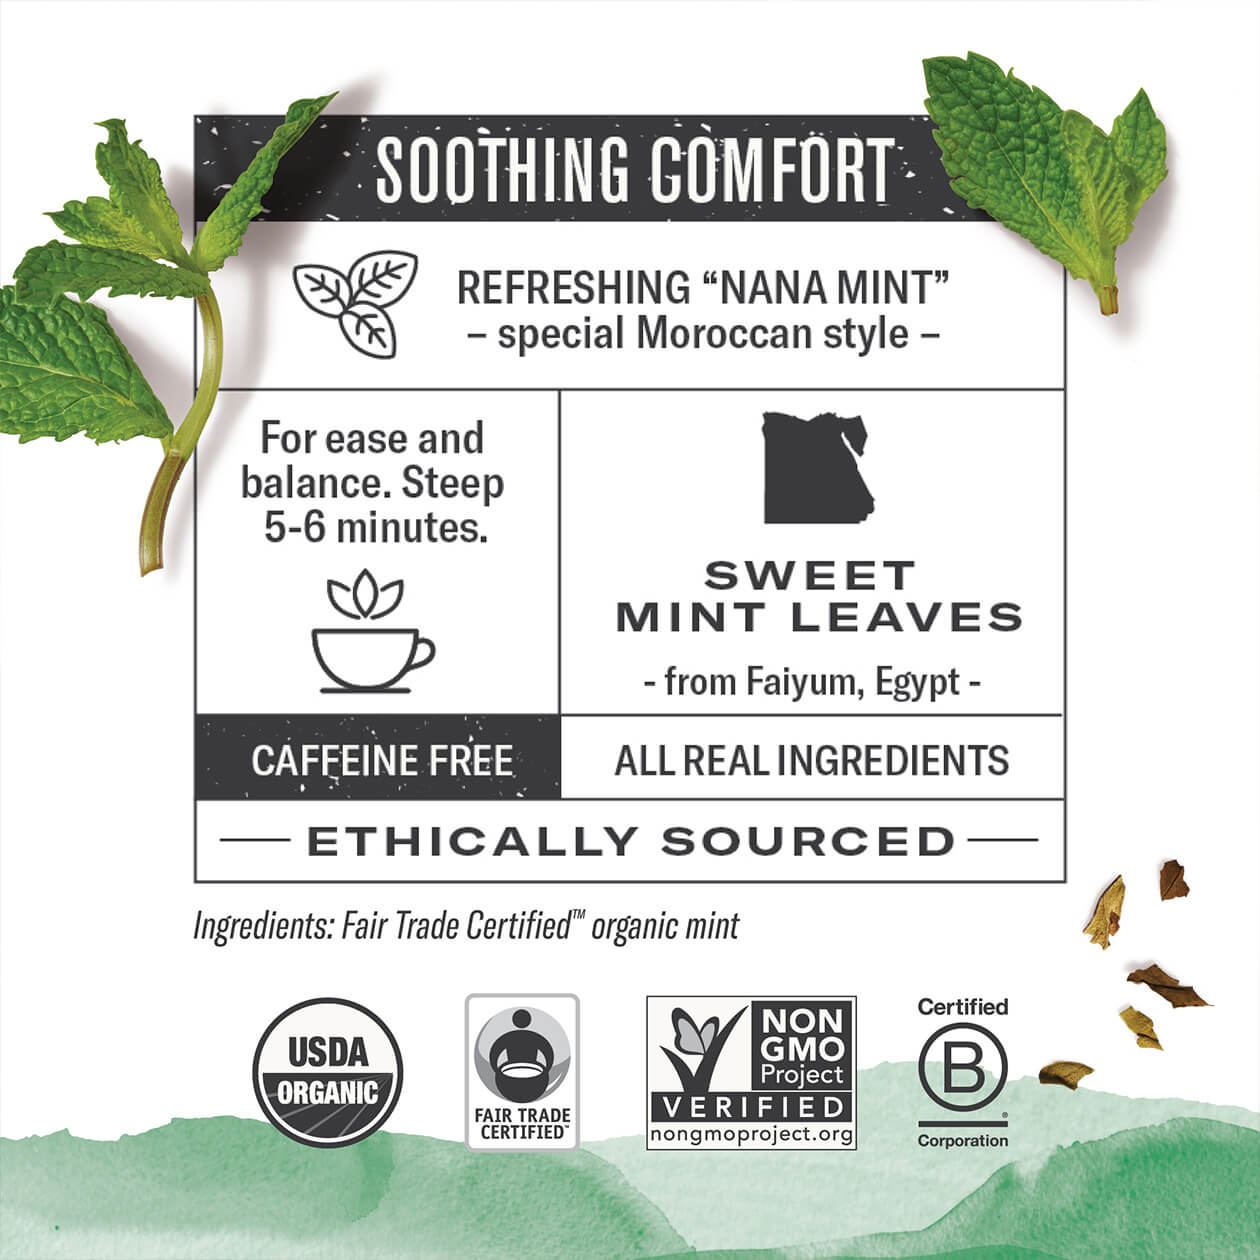 Infographic about Moroccan Mint: steep 5-6 minutes, origin: Faiyum Egypt, caffeine free, all real ingredients, ethically sourced